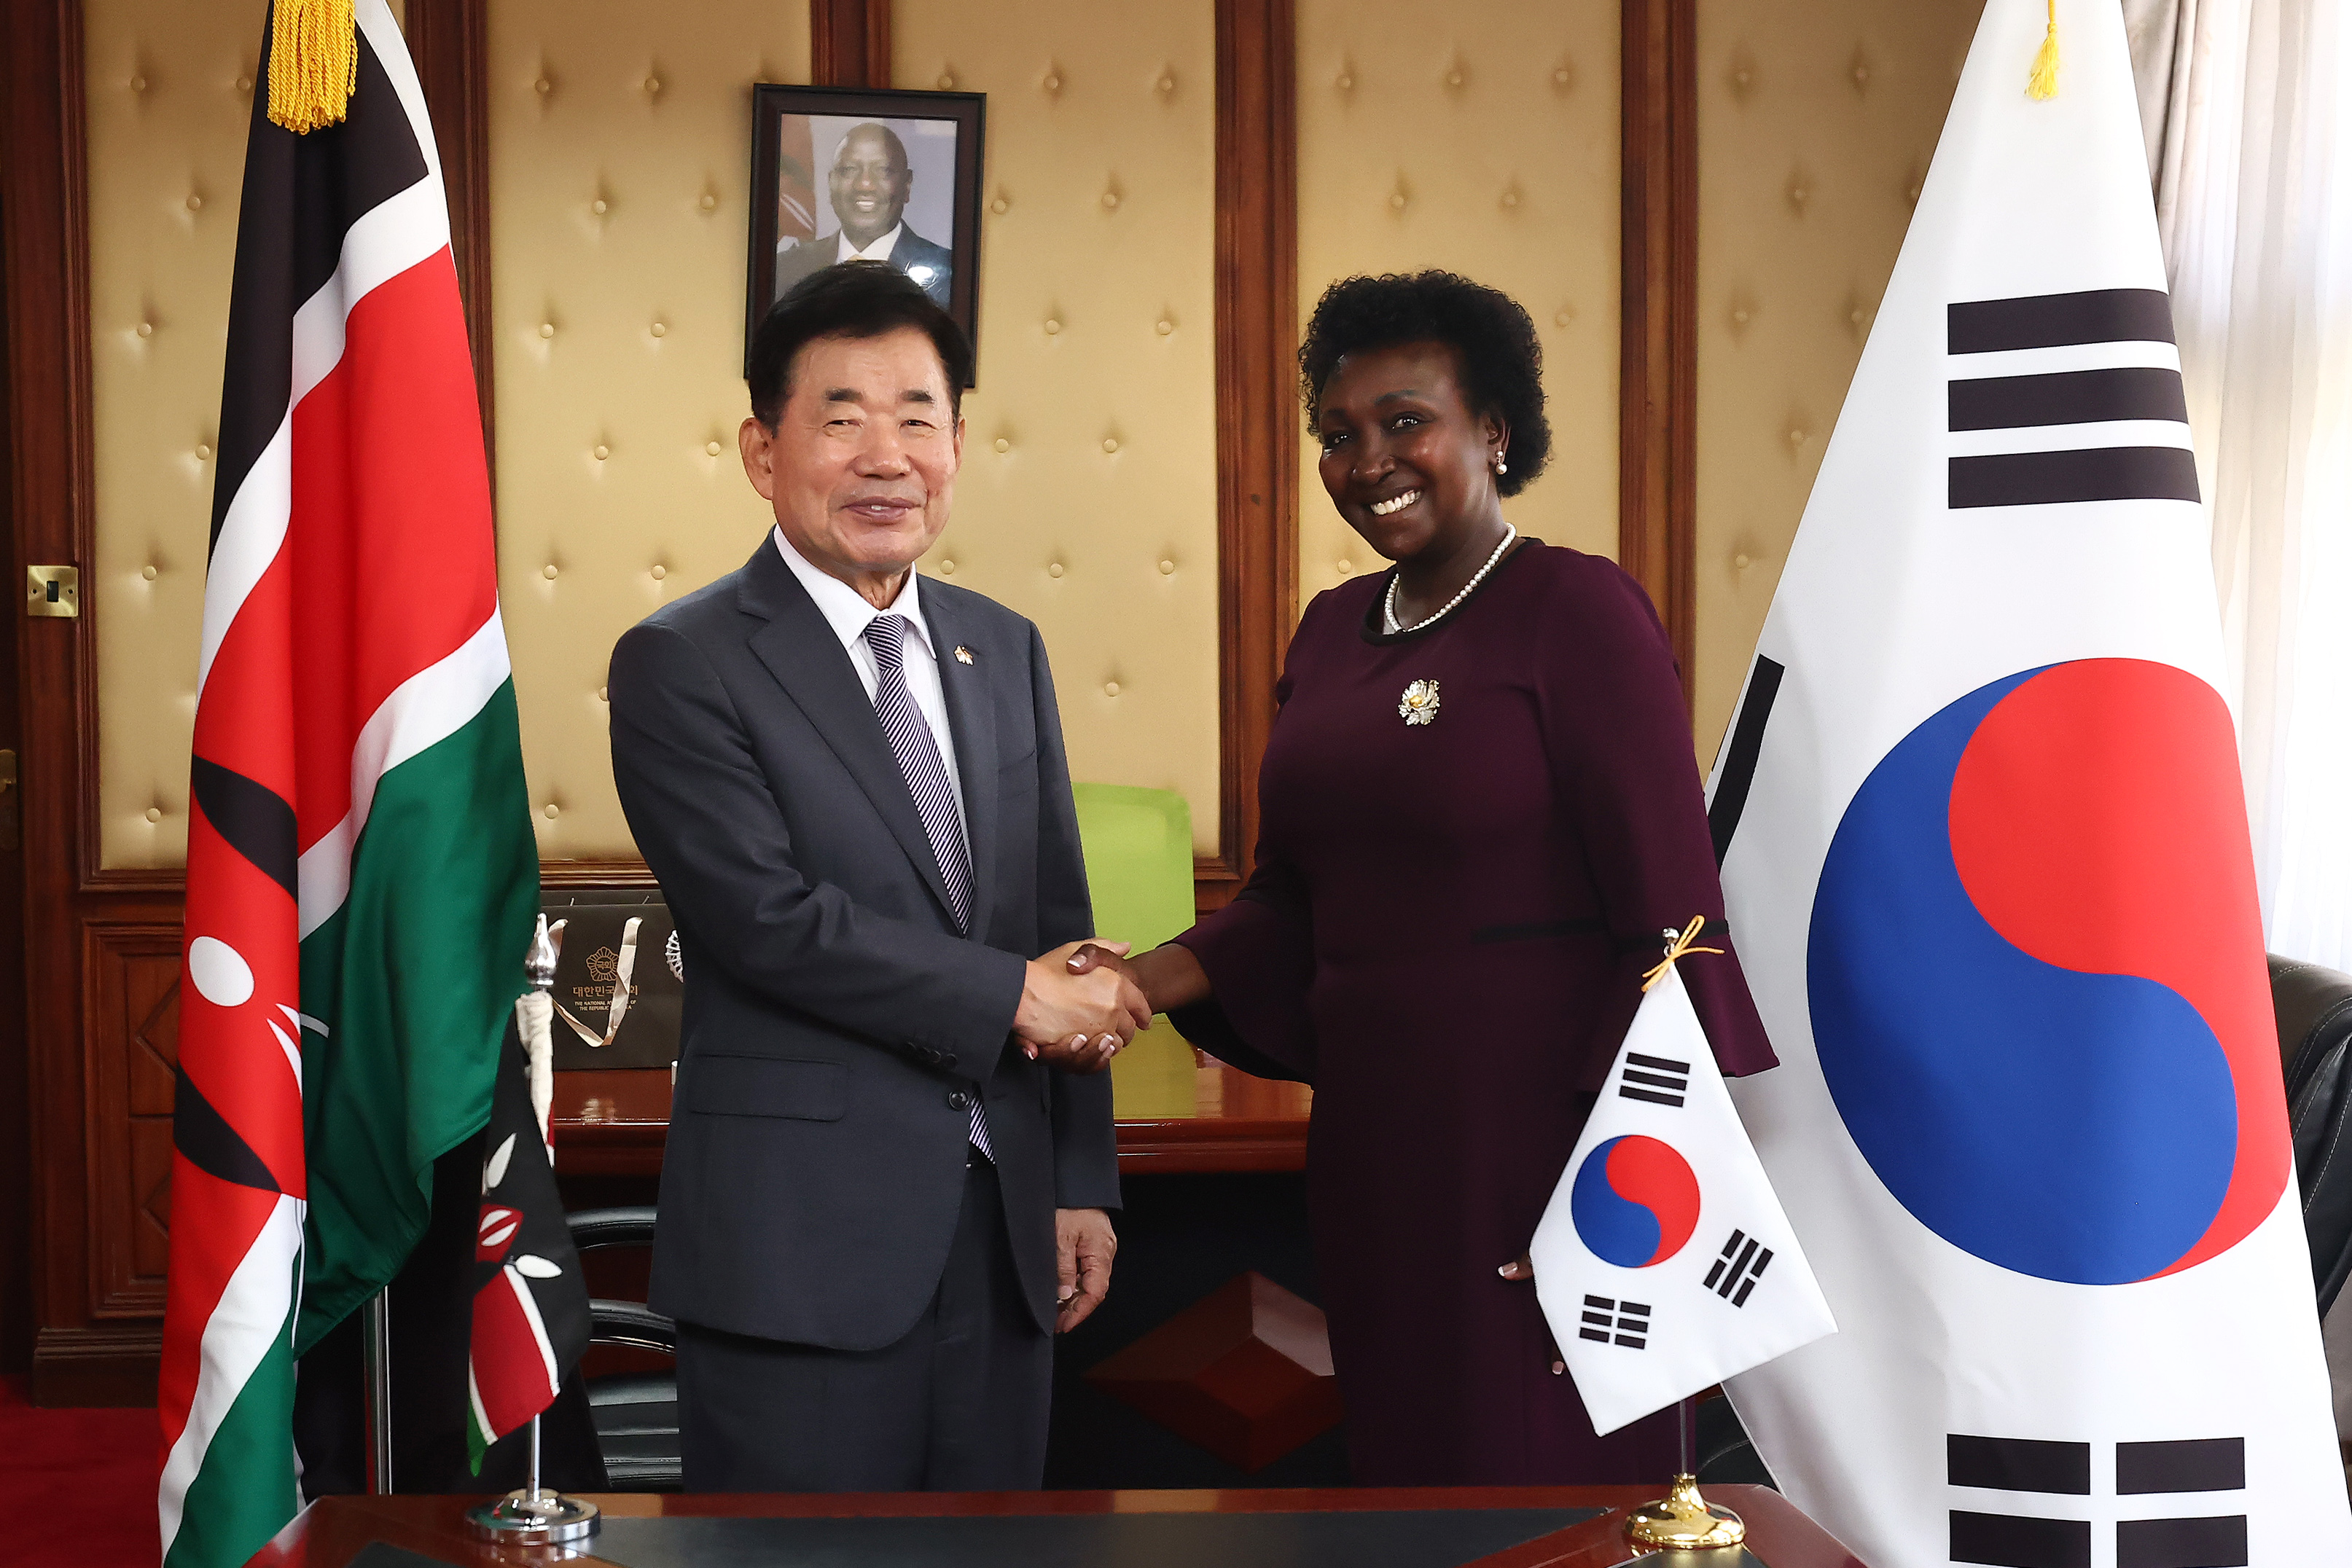 Speaker Kim Jin-pyo meets with leaders of African countries and has working luncheon with Deputy Speaker of the Kenyan House of Representatives